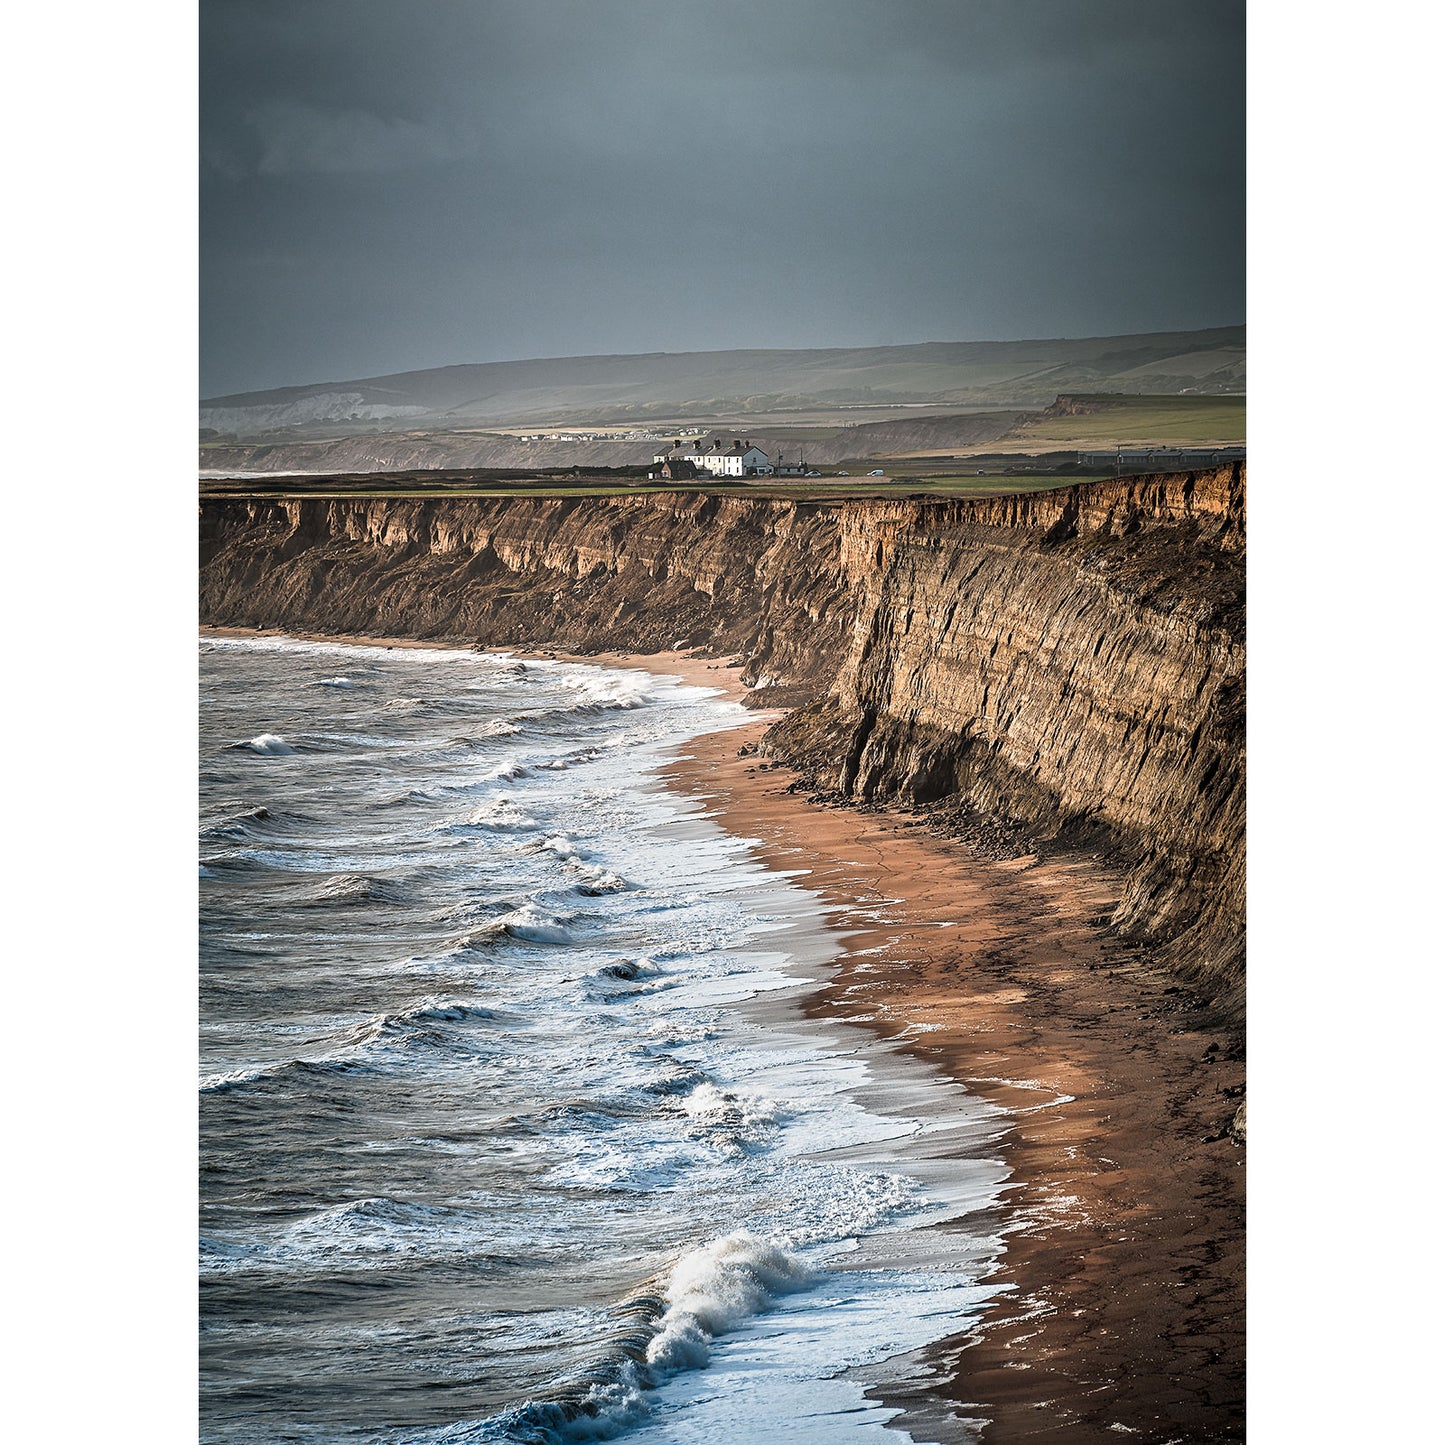 A train traveling along coastal cliffs under a Stormy seas at Chale sky with waves crashing onto the shore of Wight below, captured by Available Light Photography.